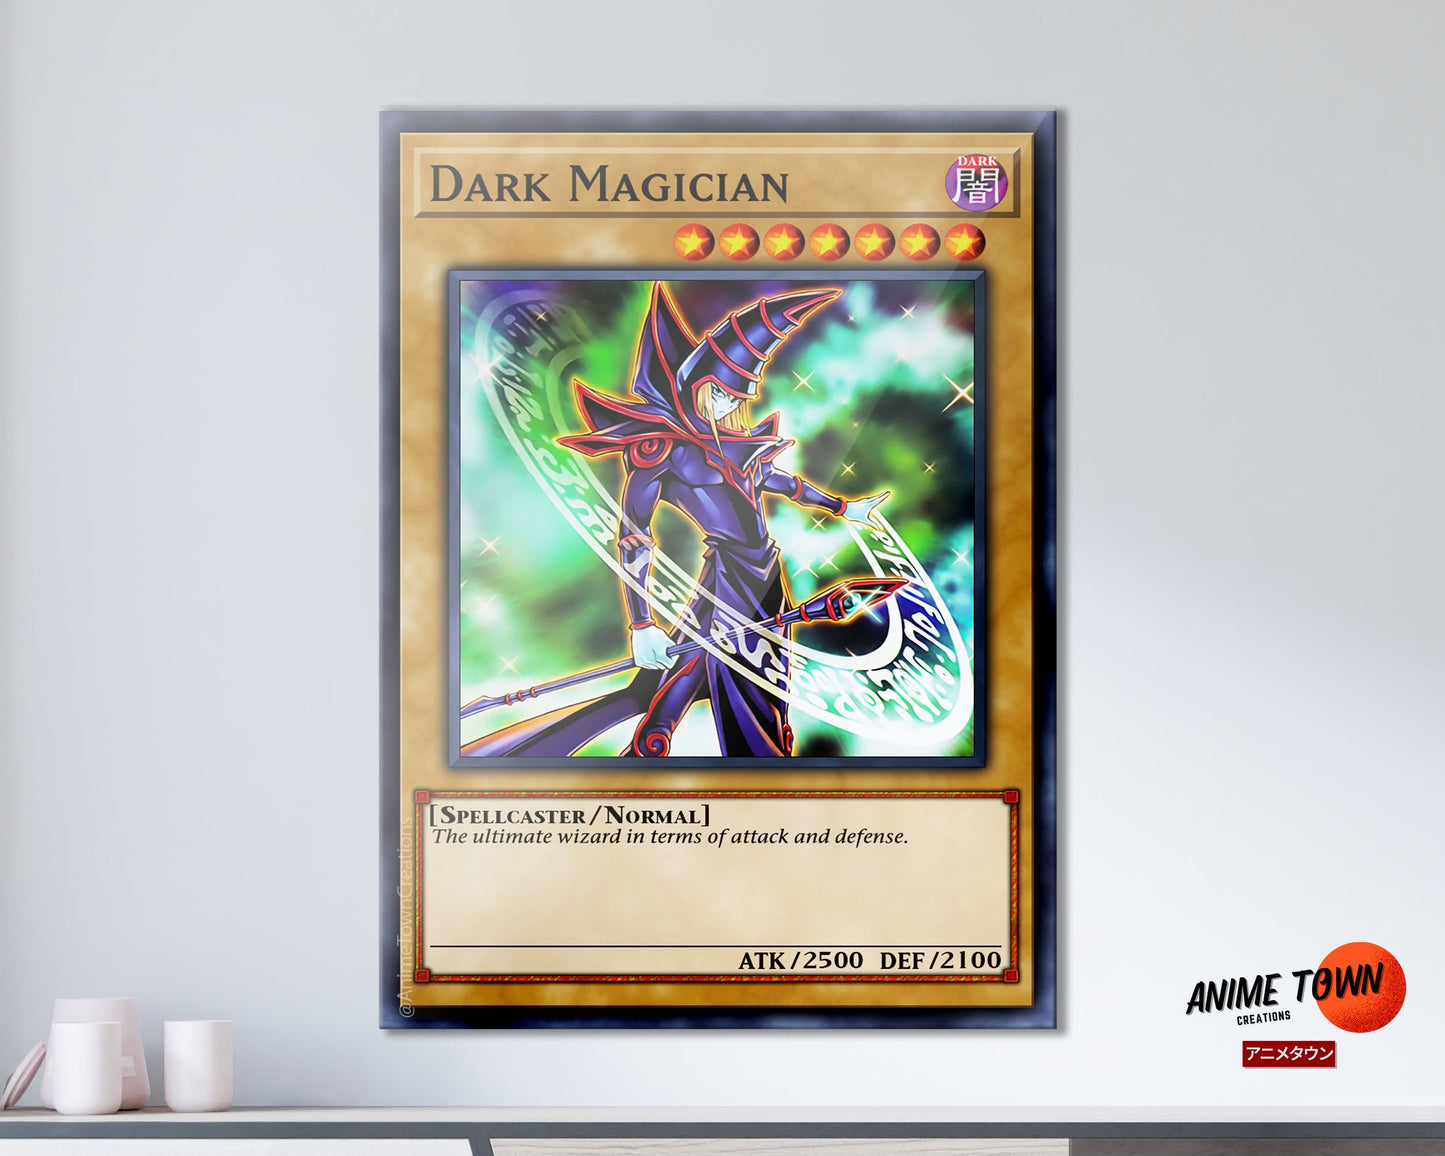 Anime Town Creations Metal Poster Yugioh Dark Magician 1st Edition Card 11" x 17" Home Goods - Anime Yu-Gi-Oh Metal Poster